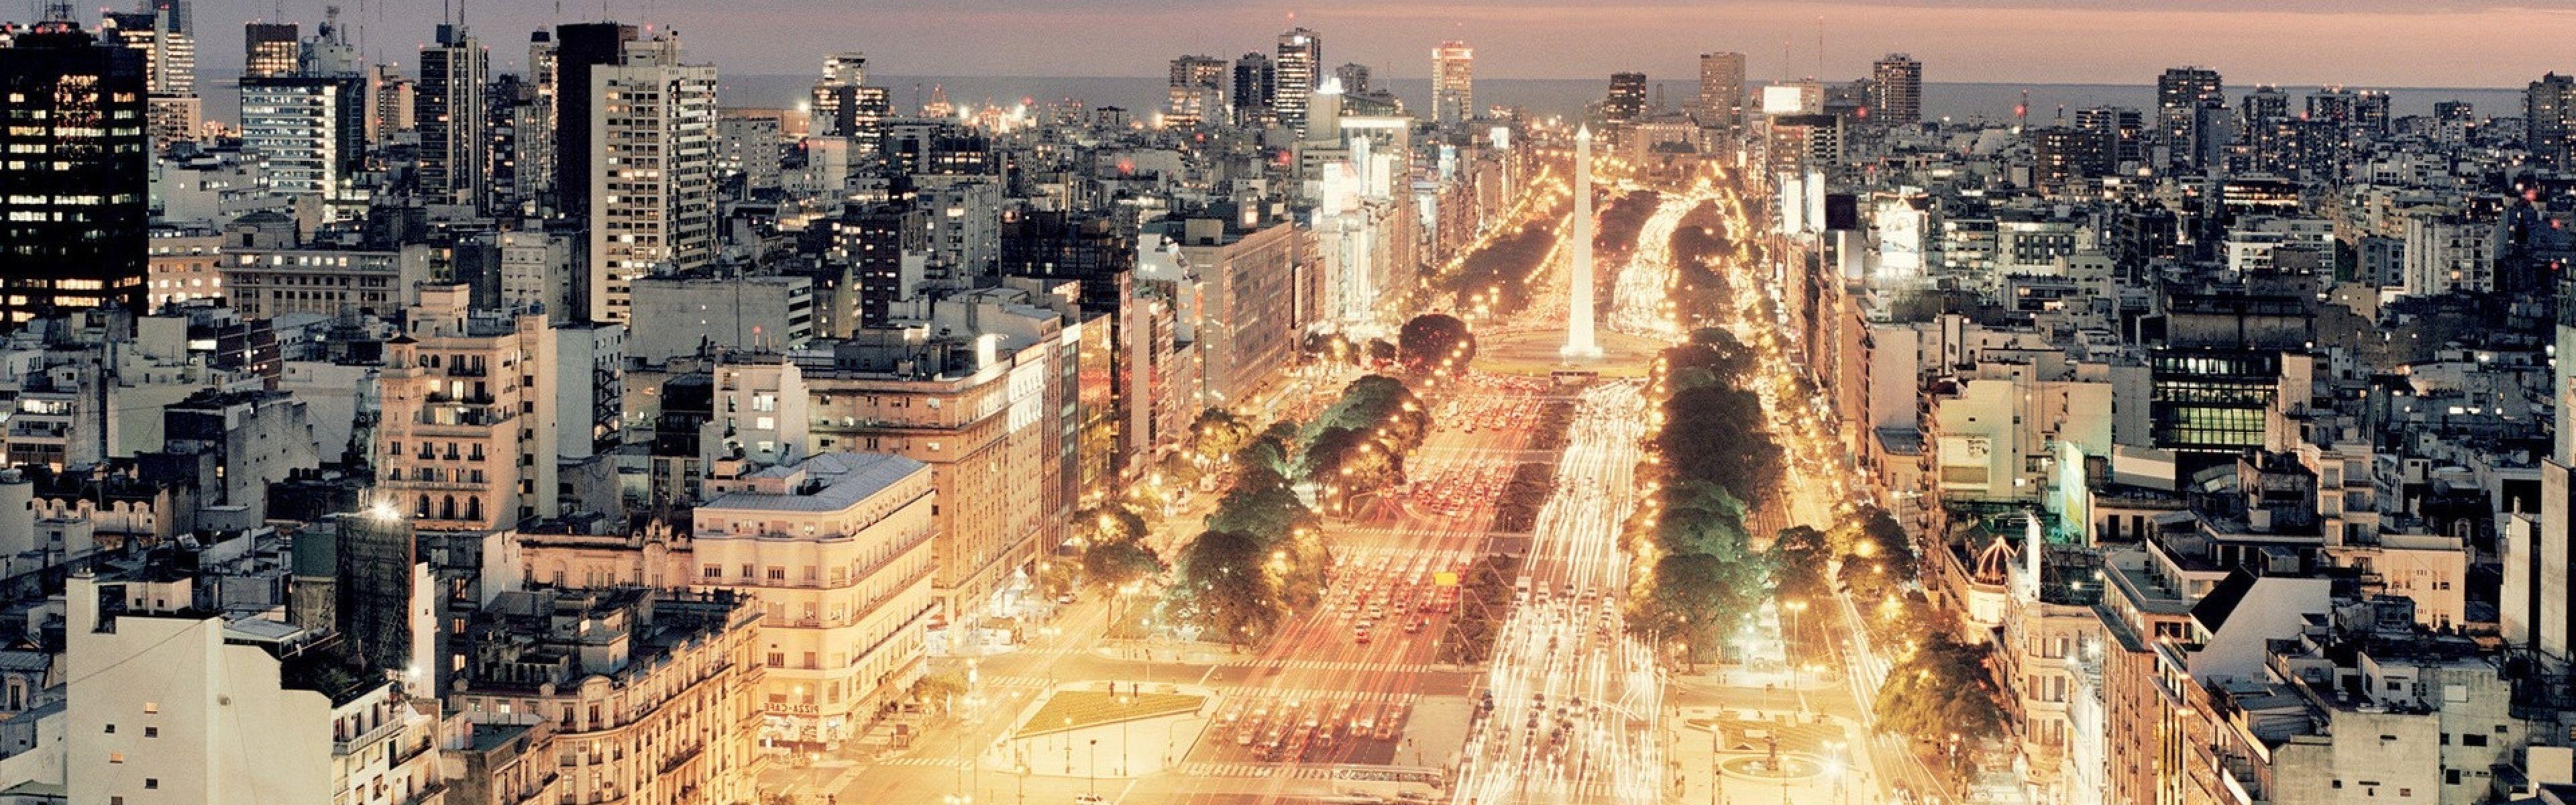 Download Wallpaper 3840x1200 Buenos aires, Traffic, City, Night